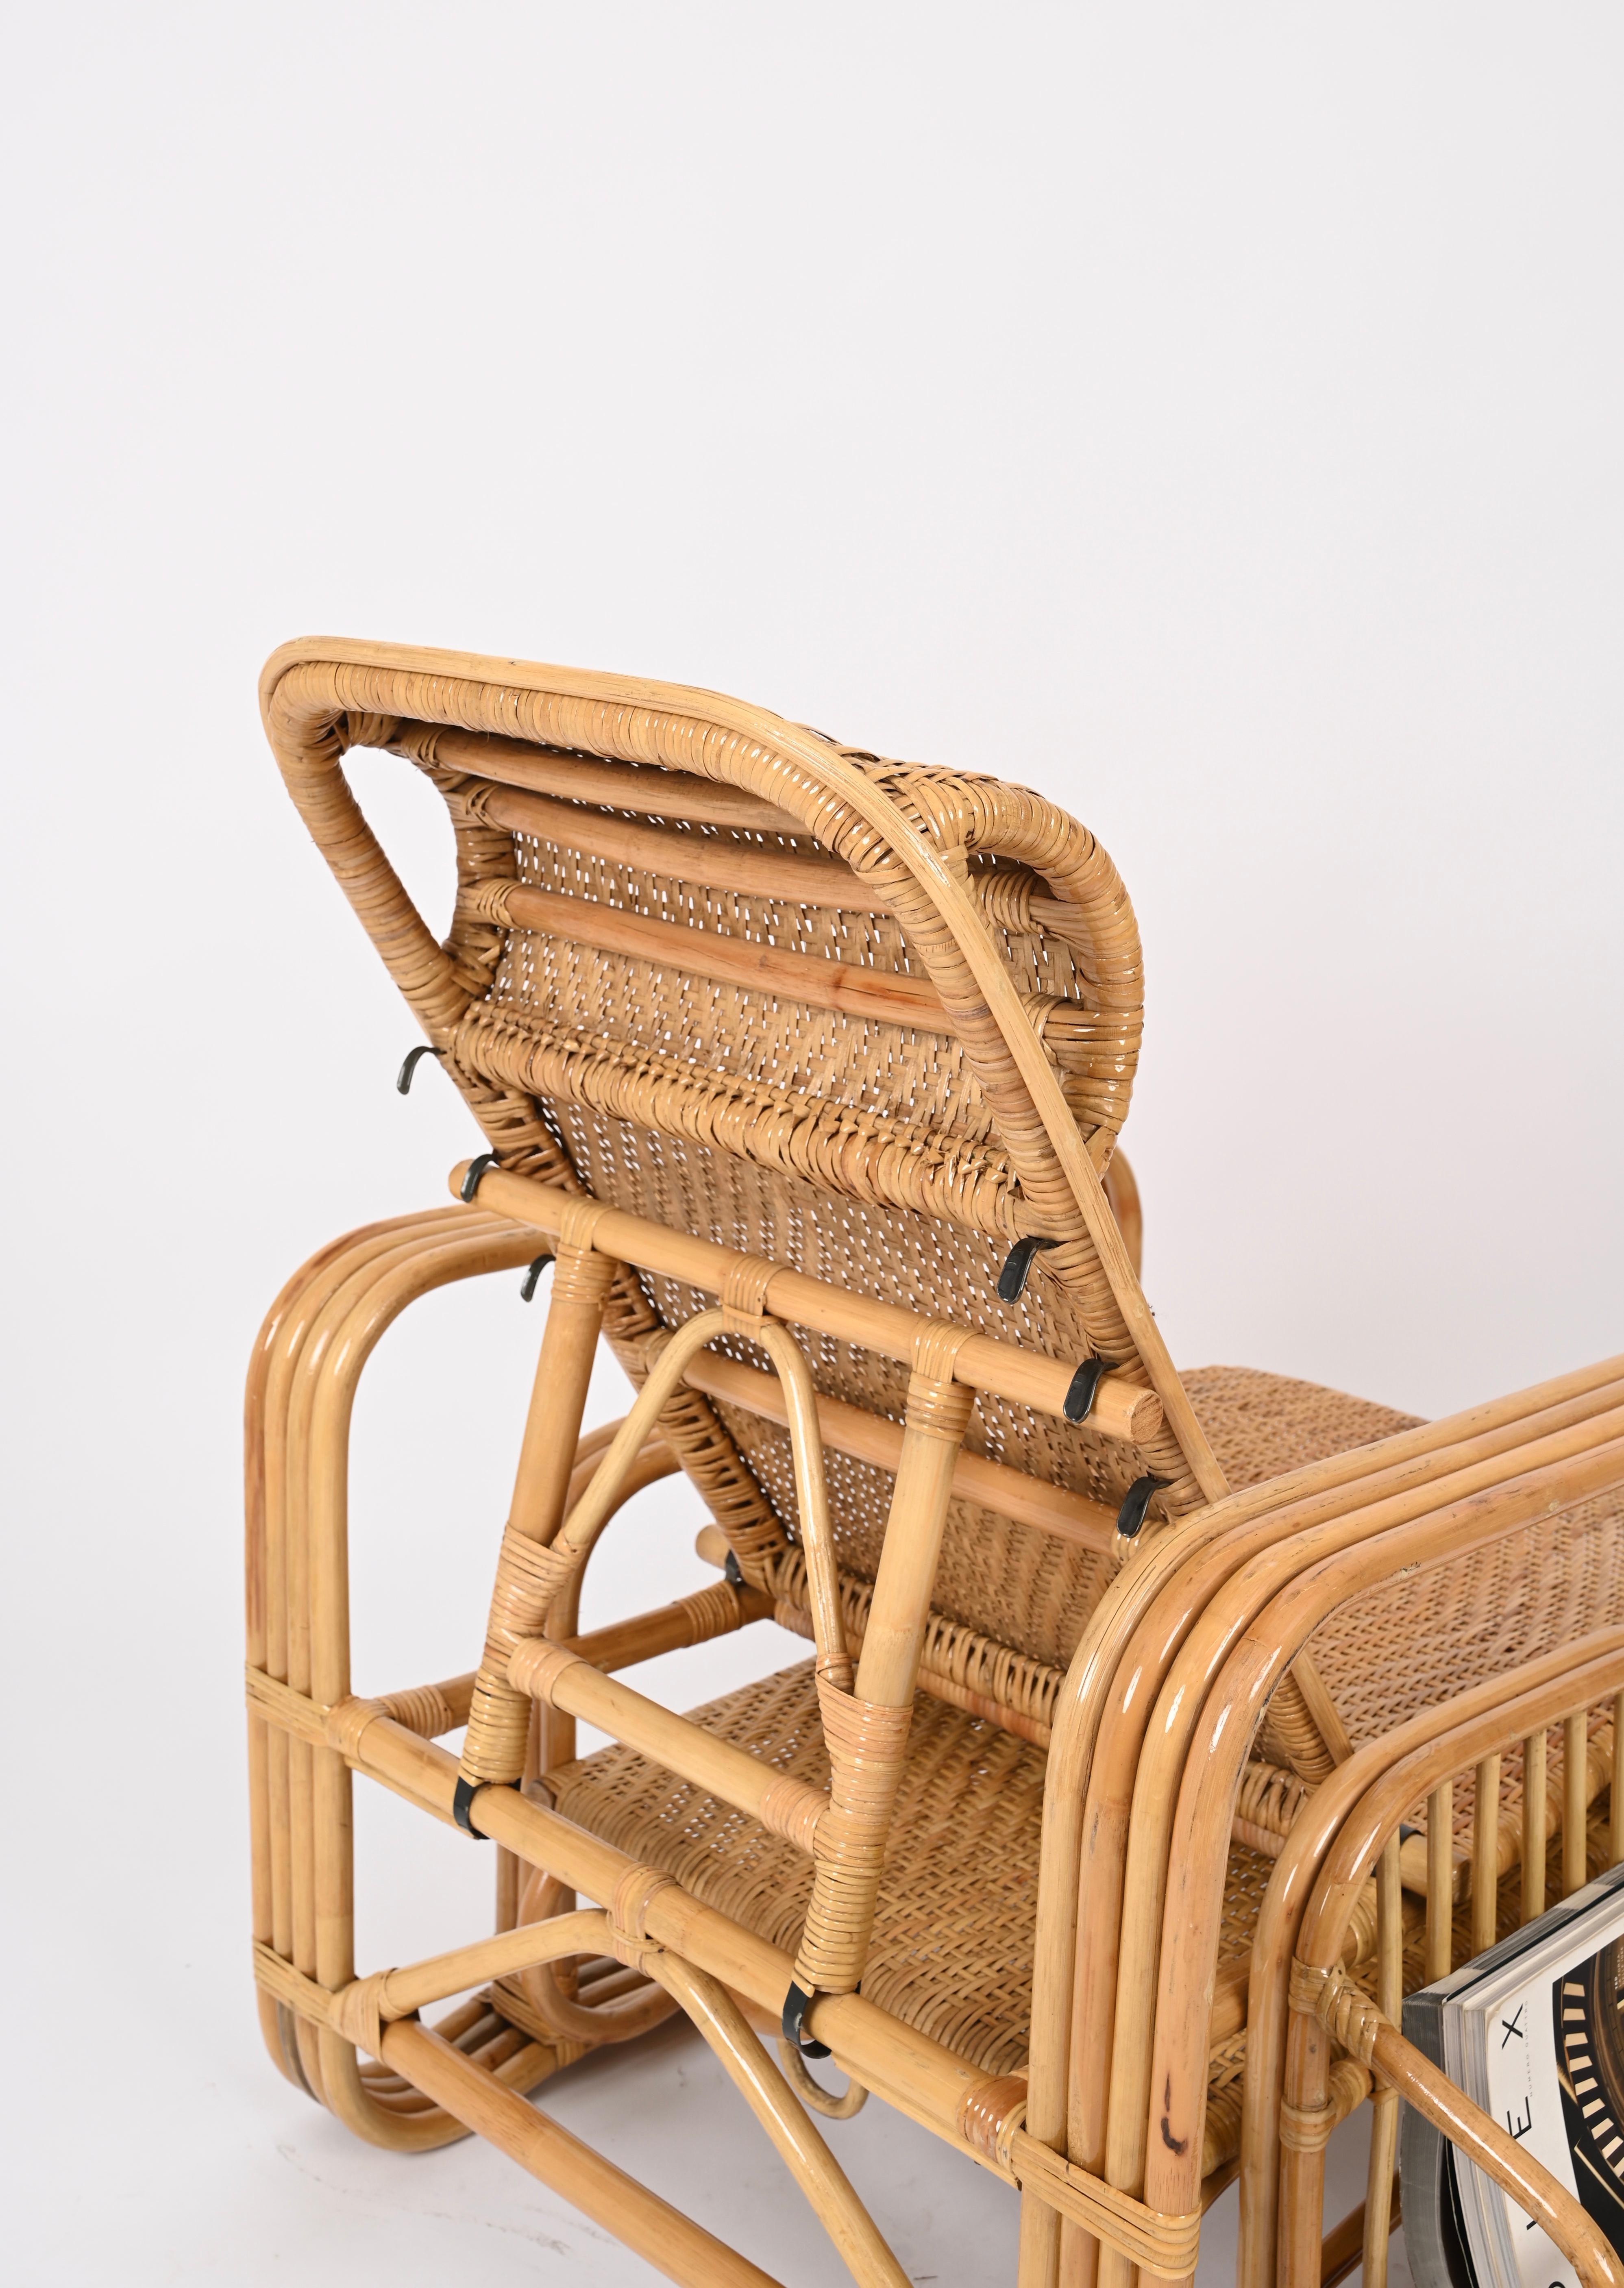 Pair of Adjustable Chaise Longue / Lounge Chairs, Wicker and Rattan, Italy '70s  For Sale 10